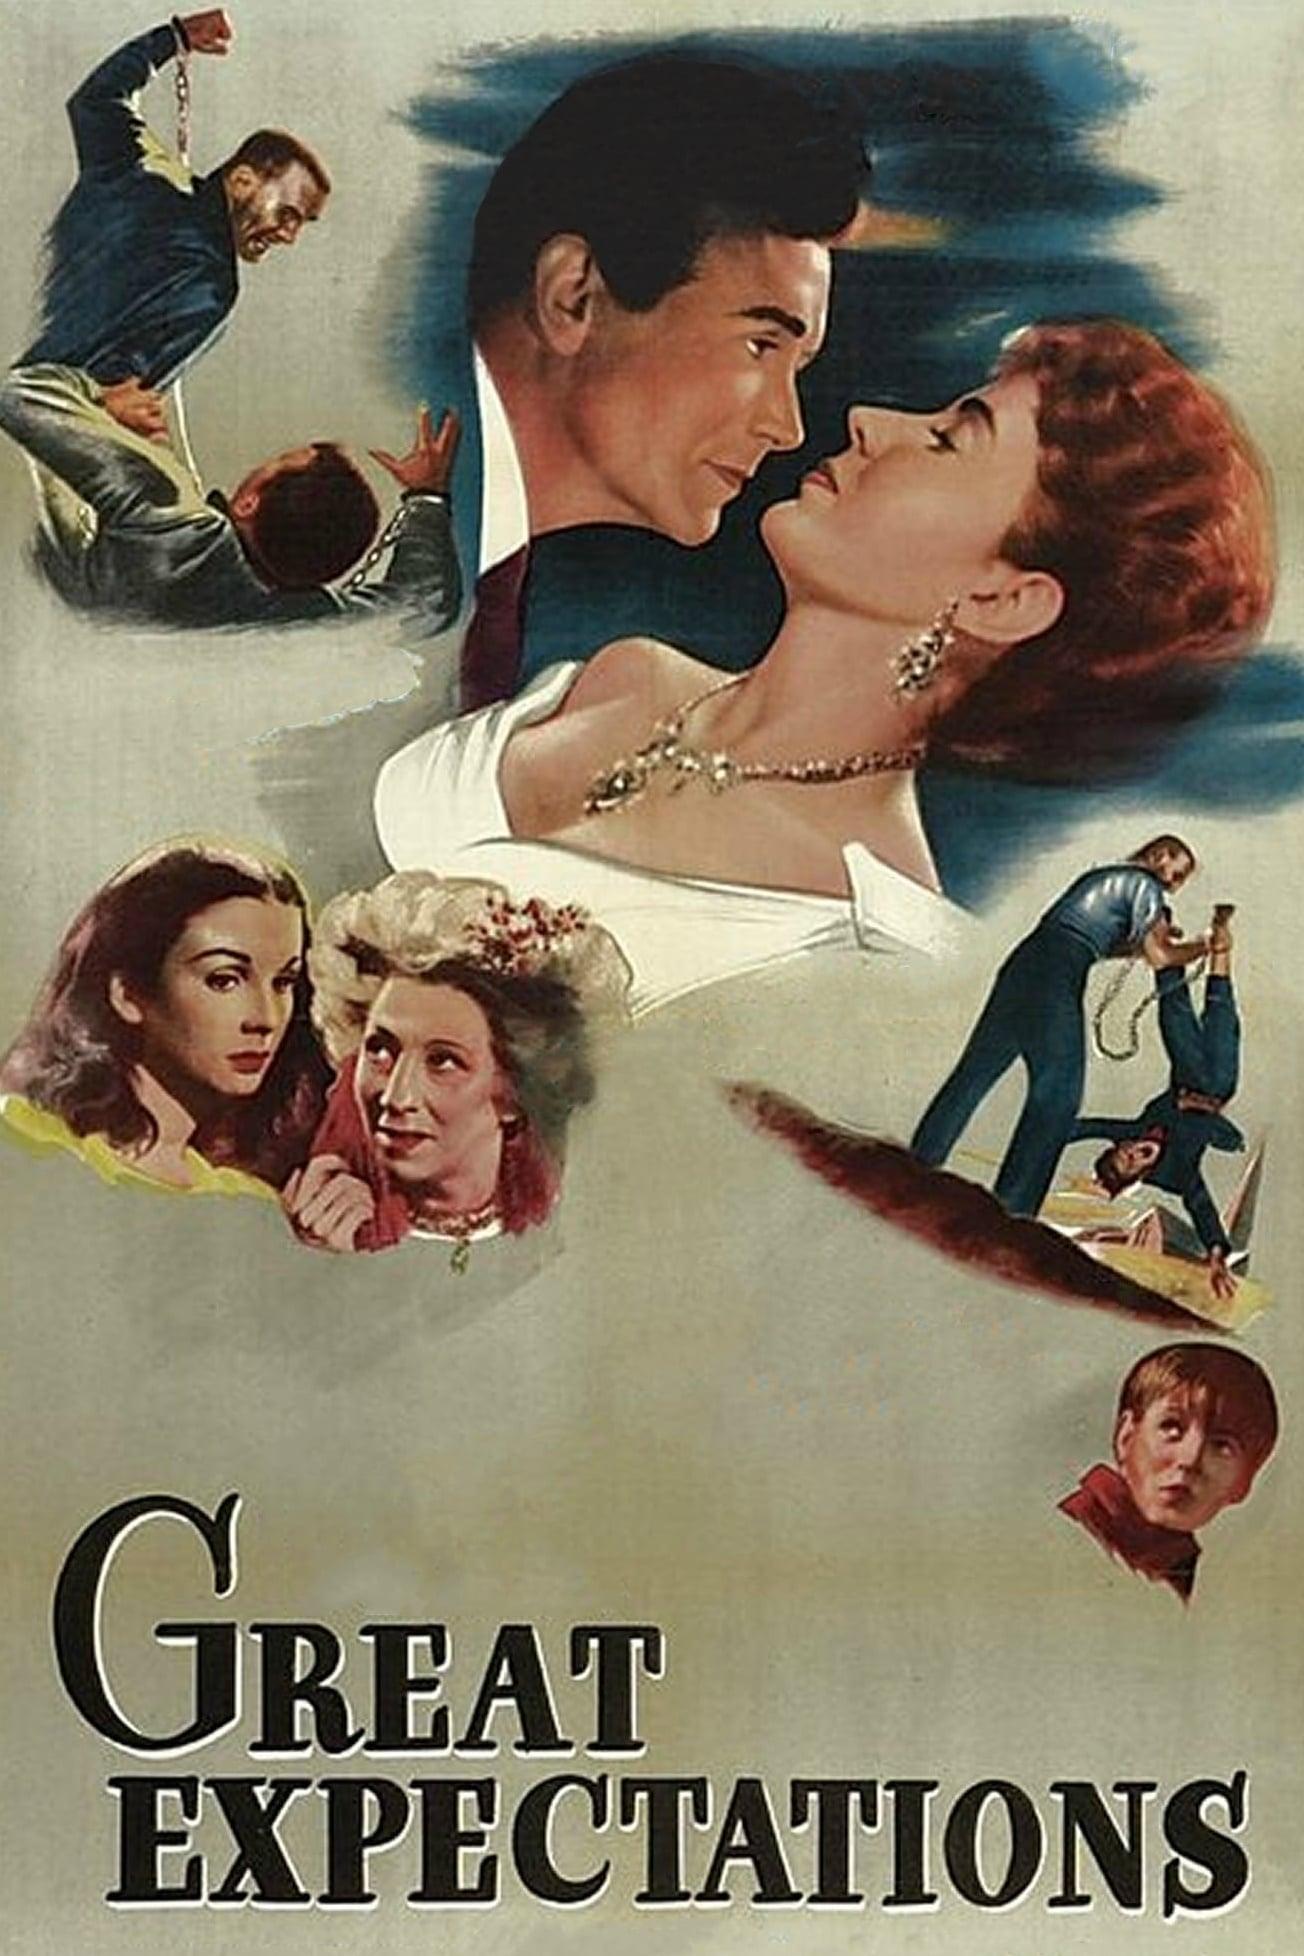 Great Expectations poster